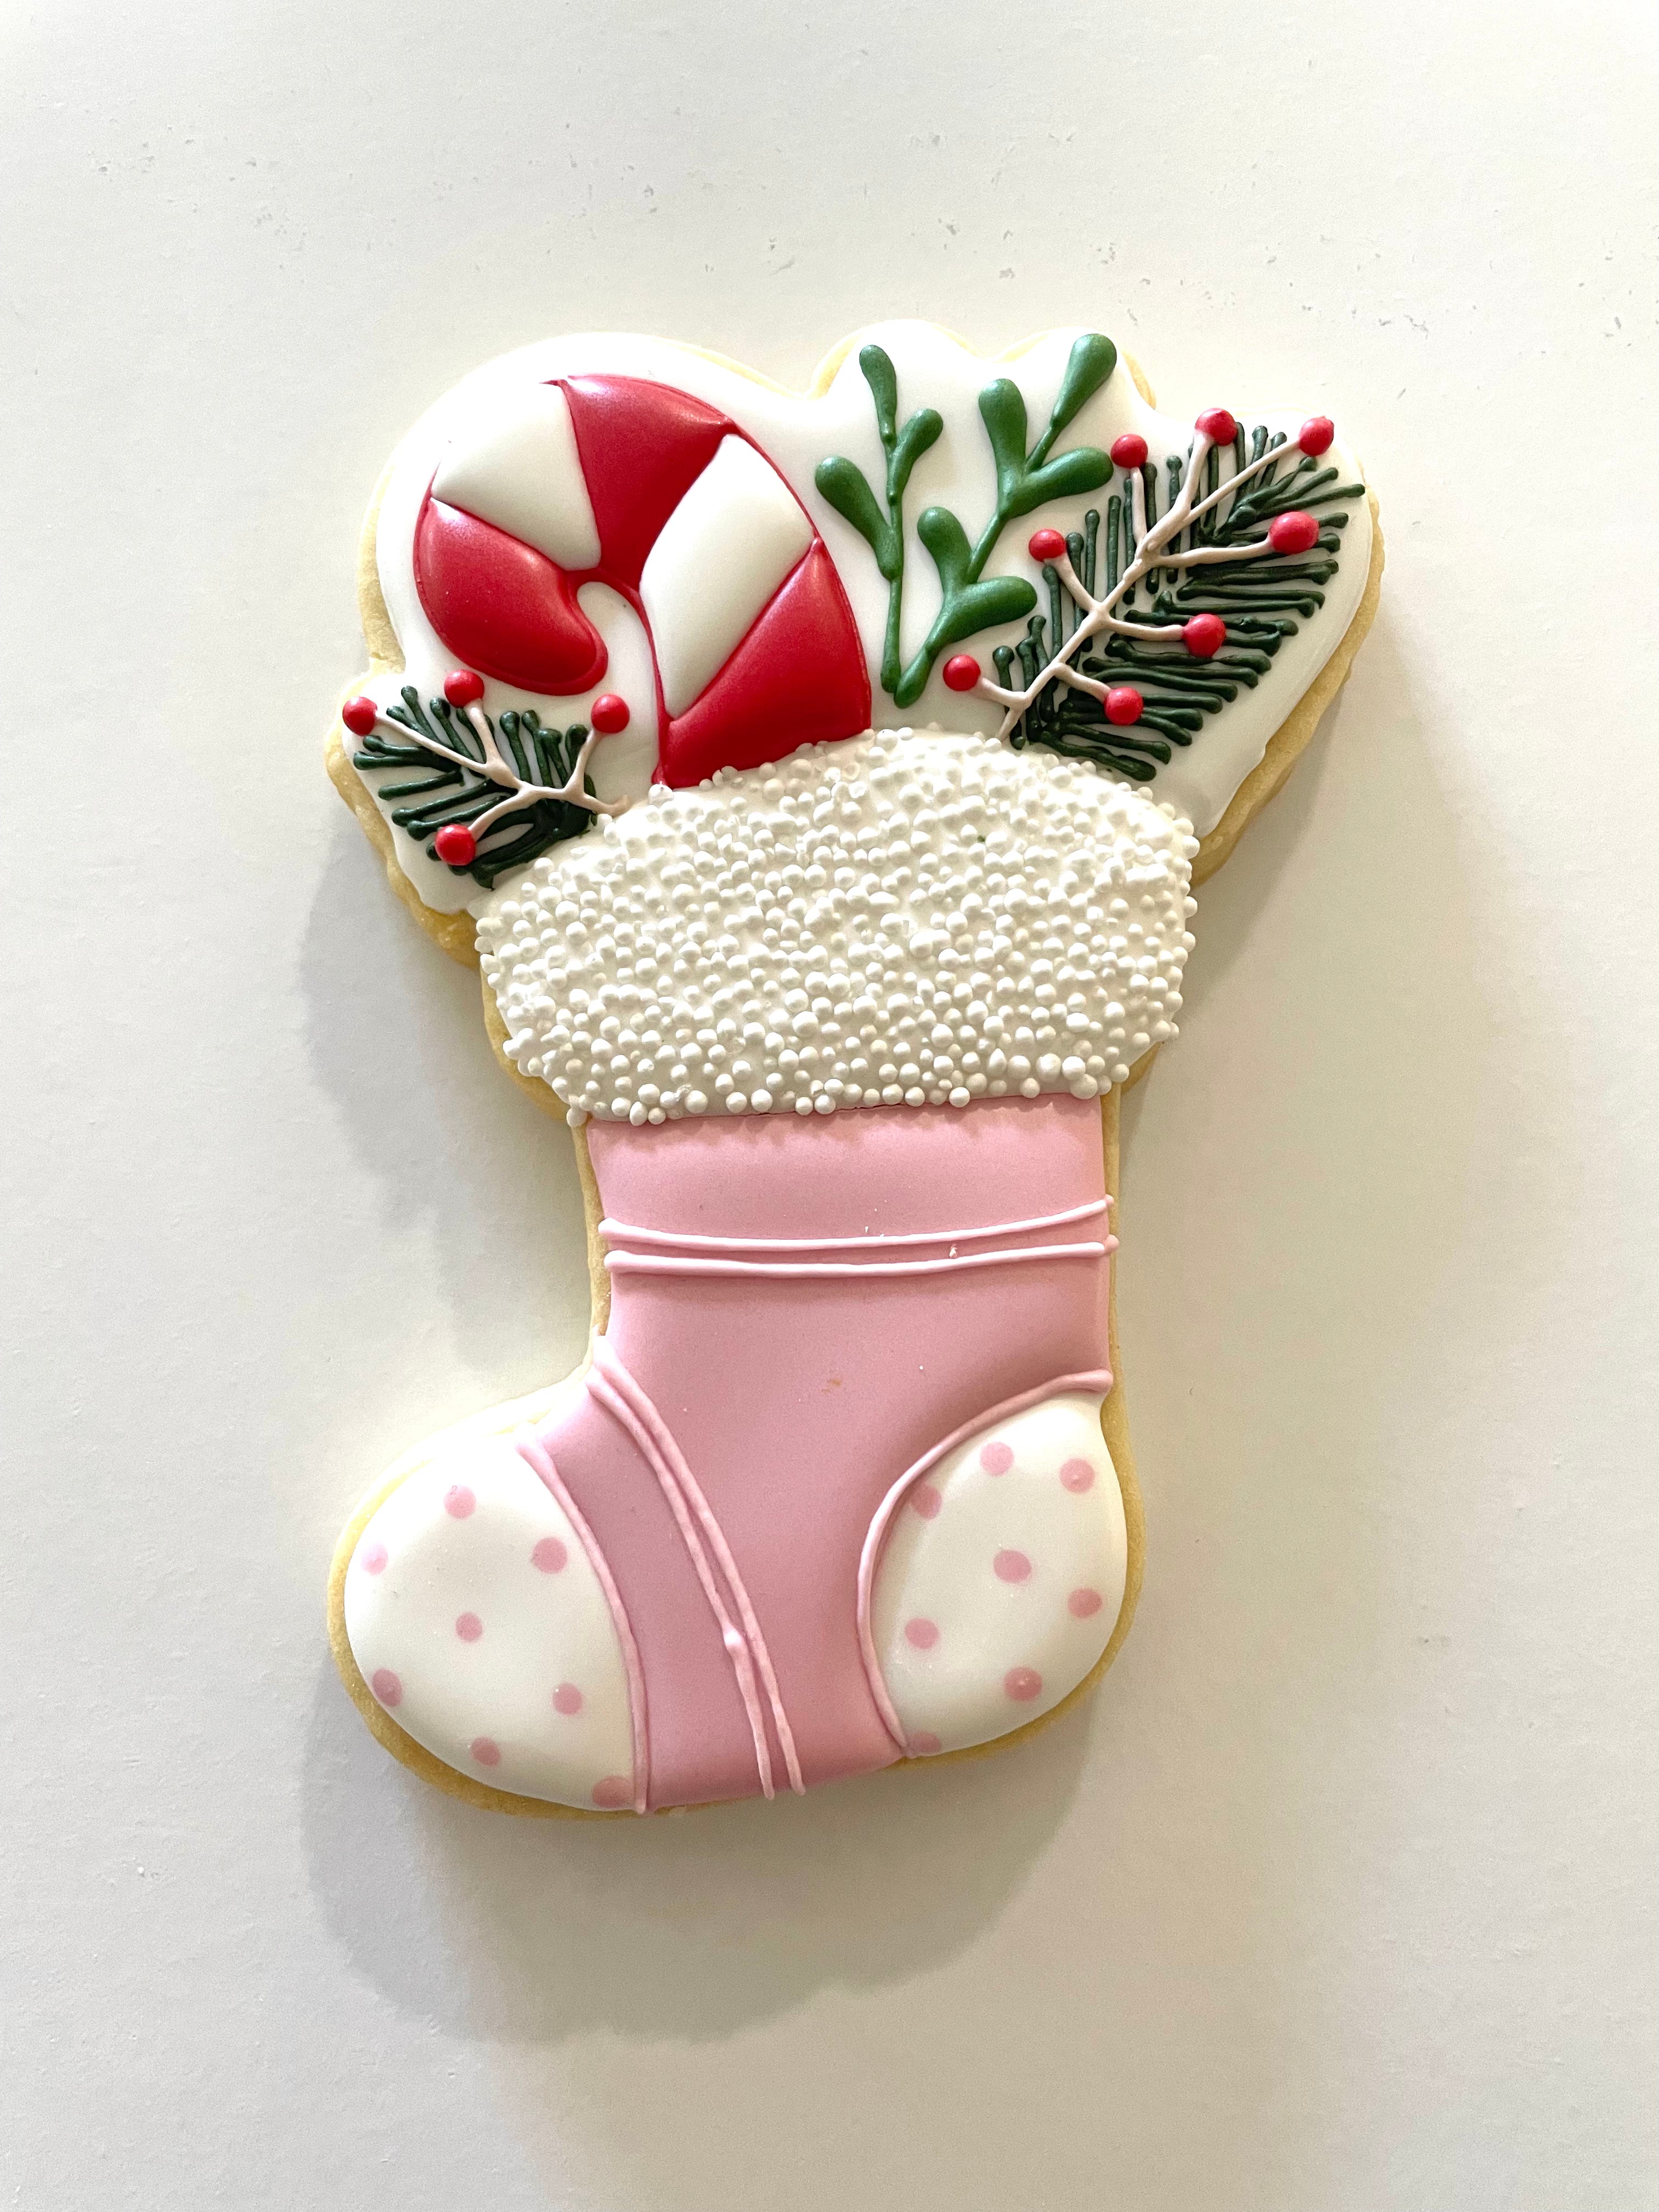 Filled Stocking Cookie